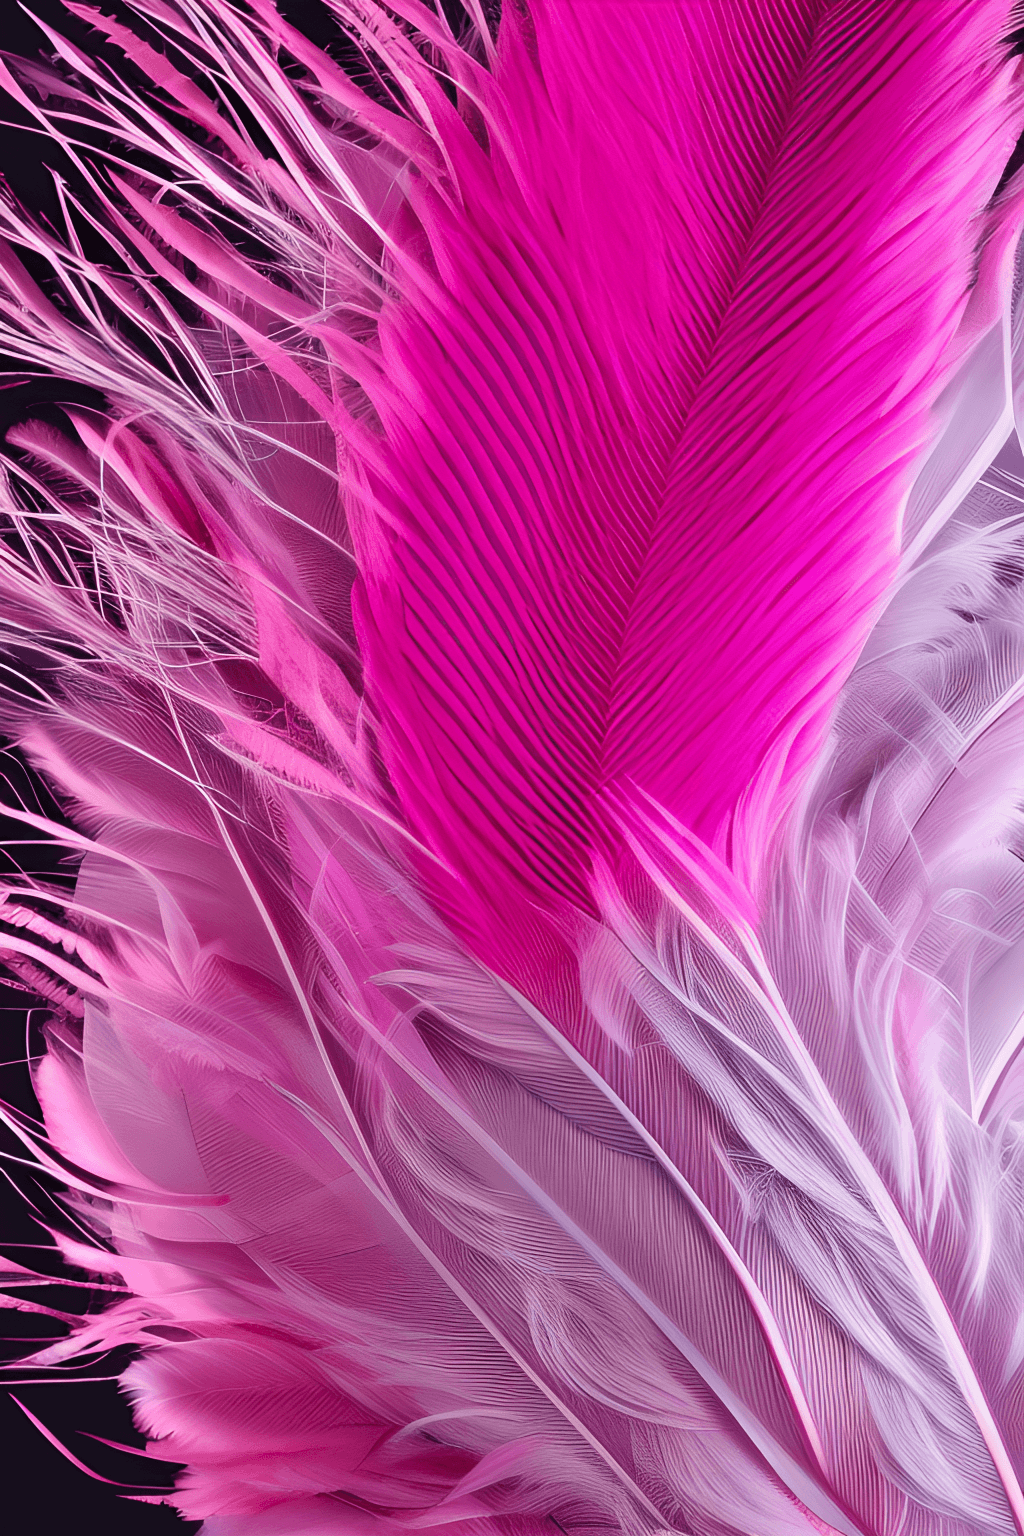 https://www.creativefabrica.com/wp-content/uploads/2023/01/29/Pink-Feathers-Sorted-By-Color-Display-59352342-1.png